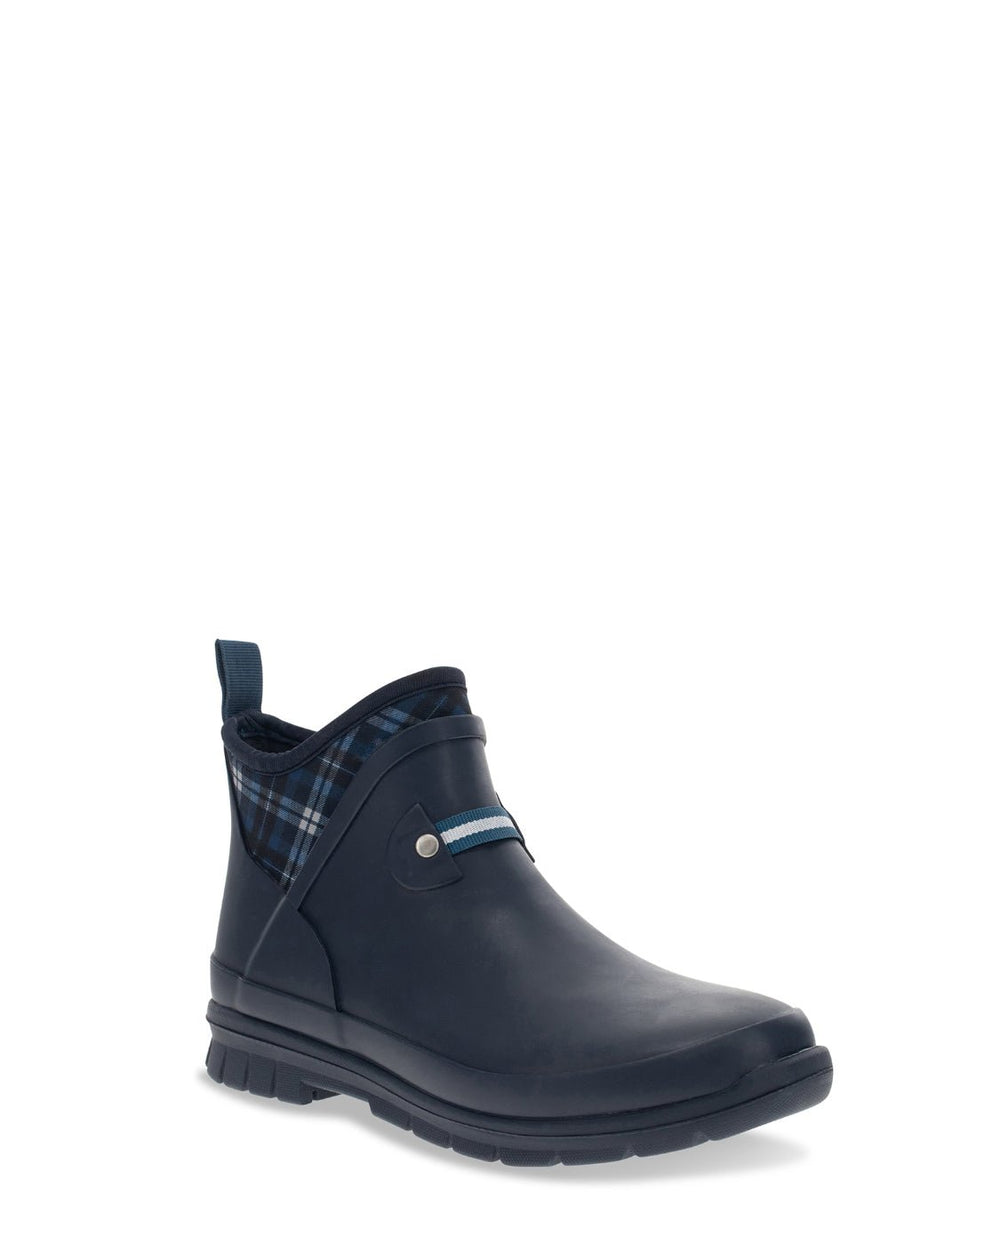 Women's Instorm Ankle Rain Boot - Navy - Western Chief